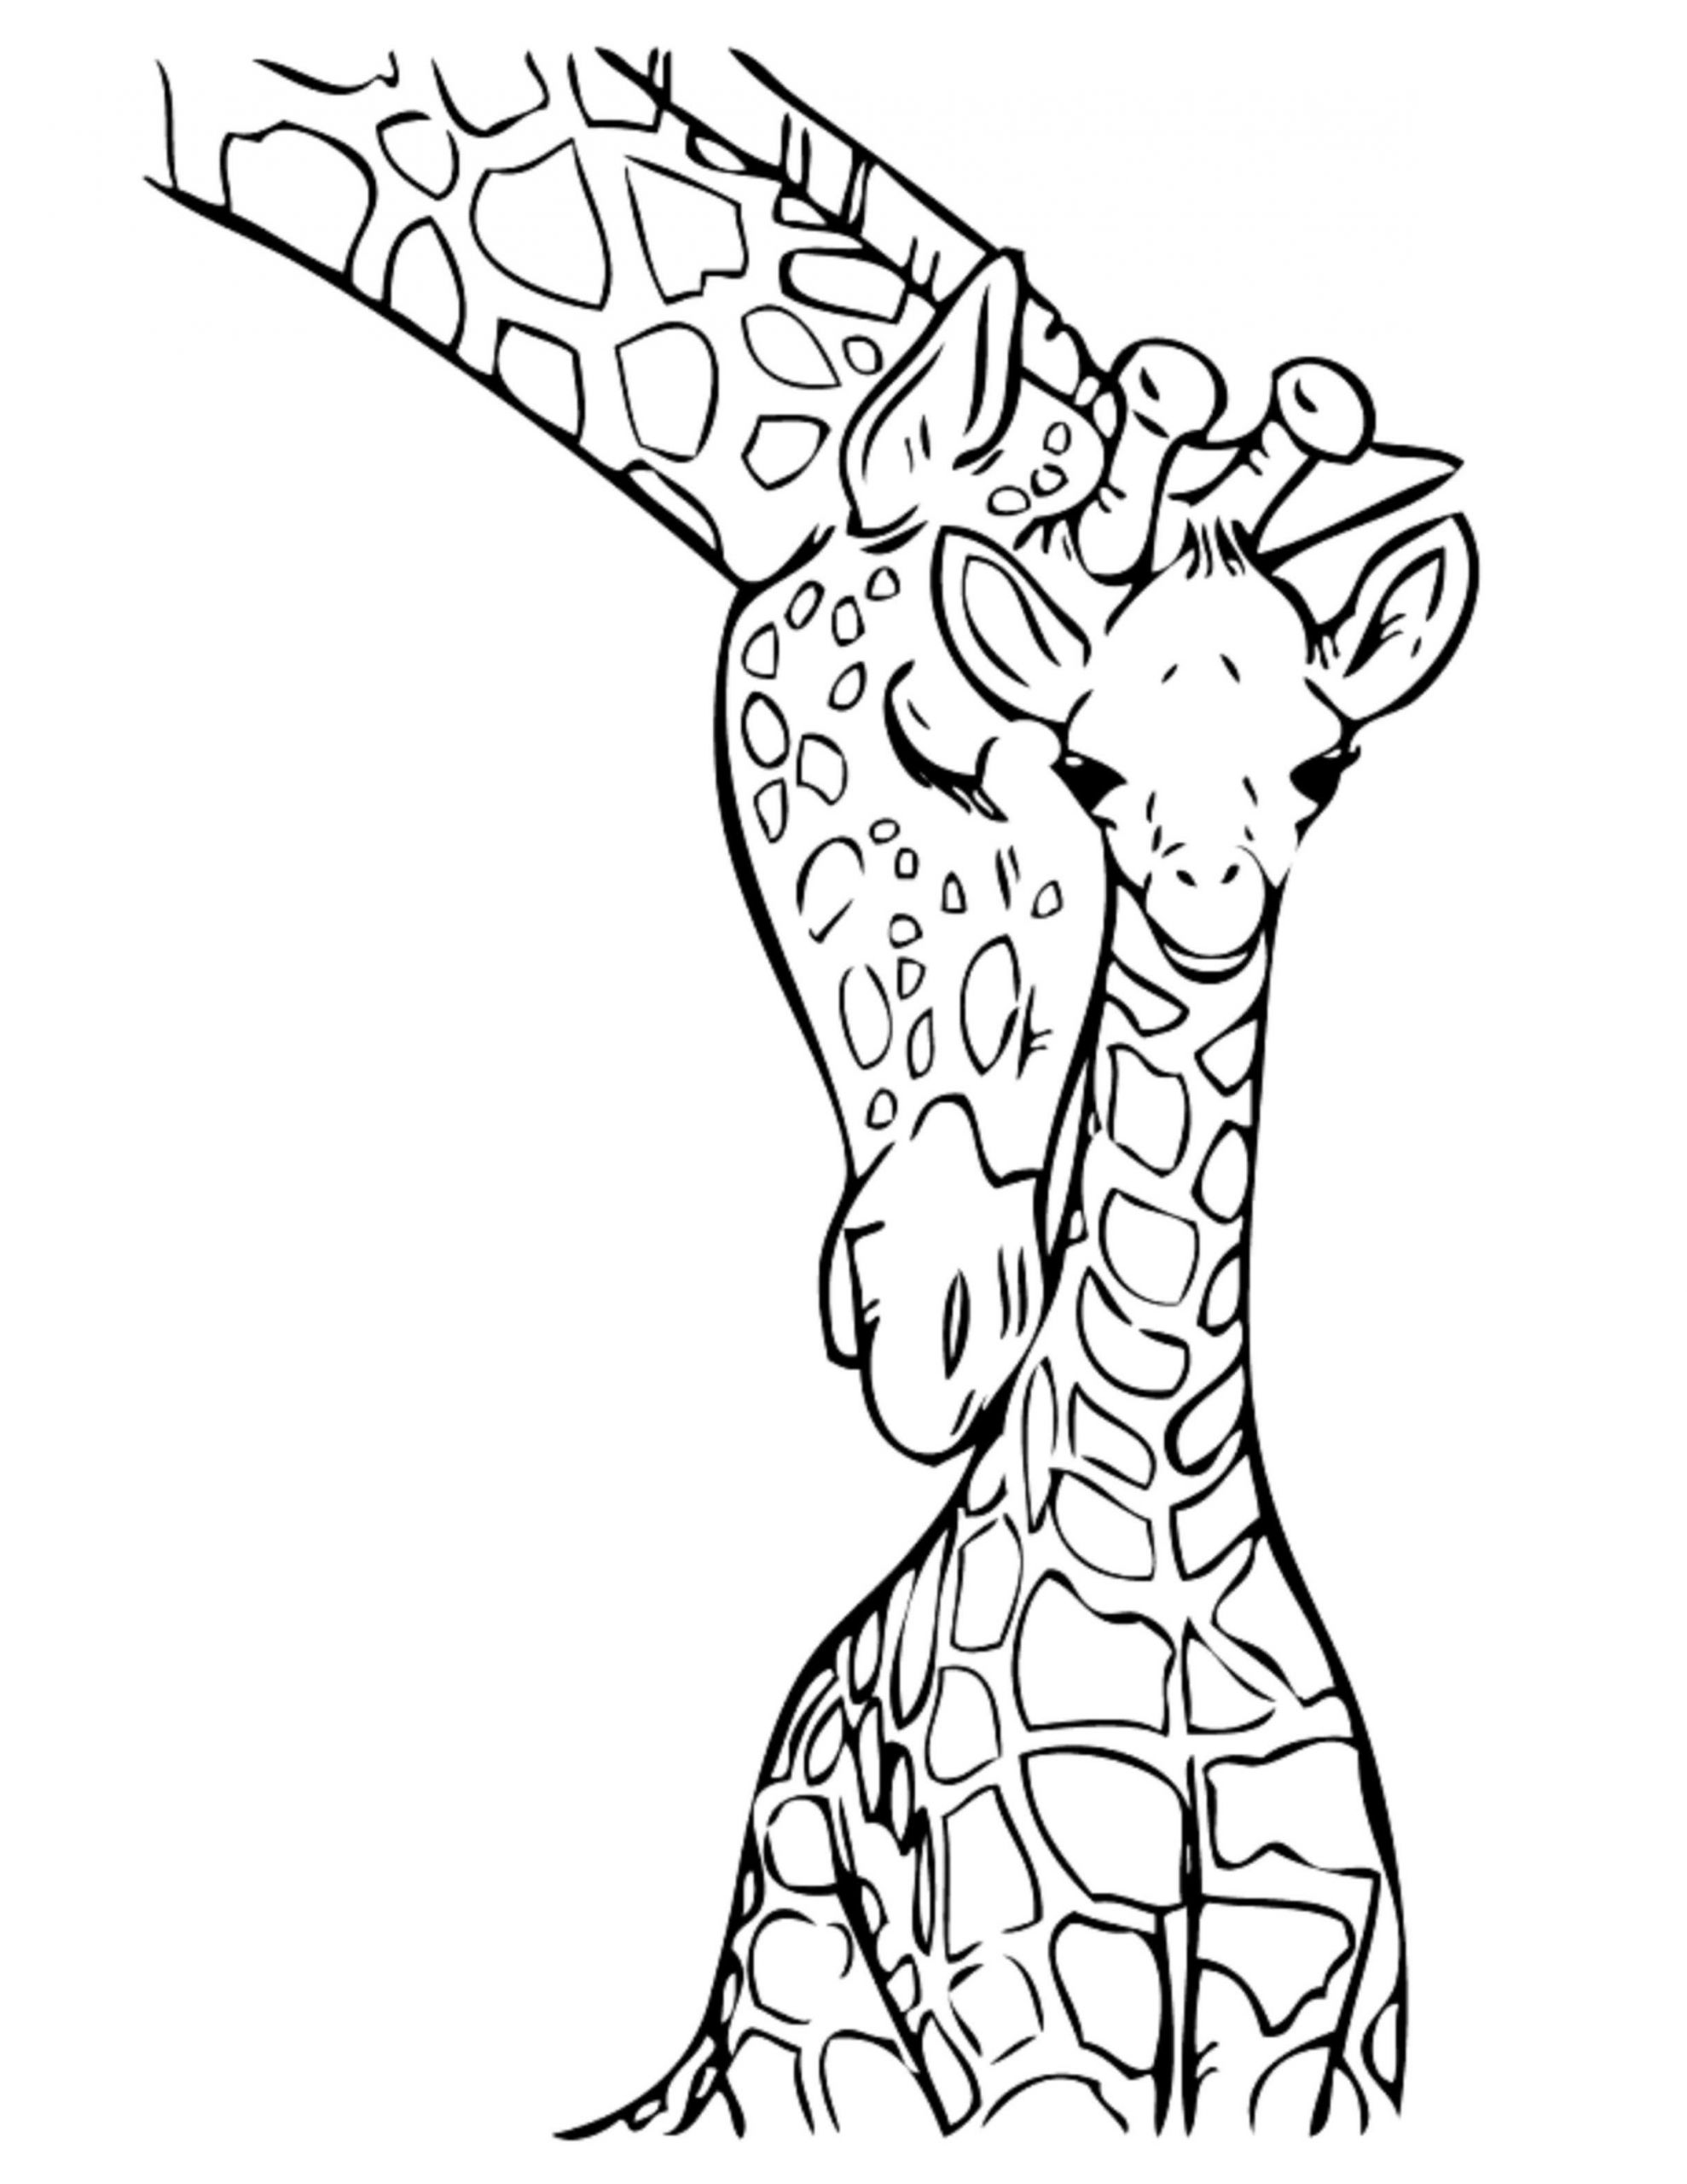 Giraffe Coloring Pages For Adults
 Giraffe Coloring Pages